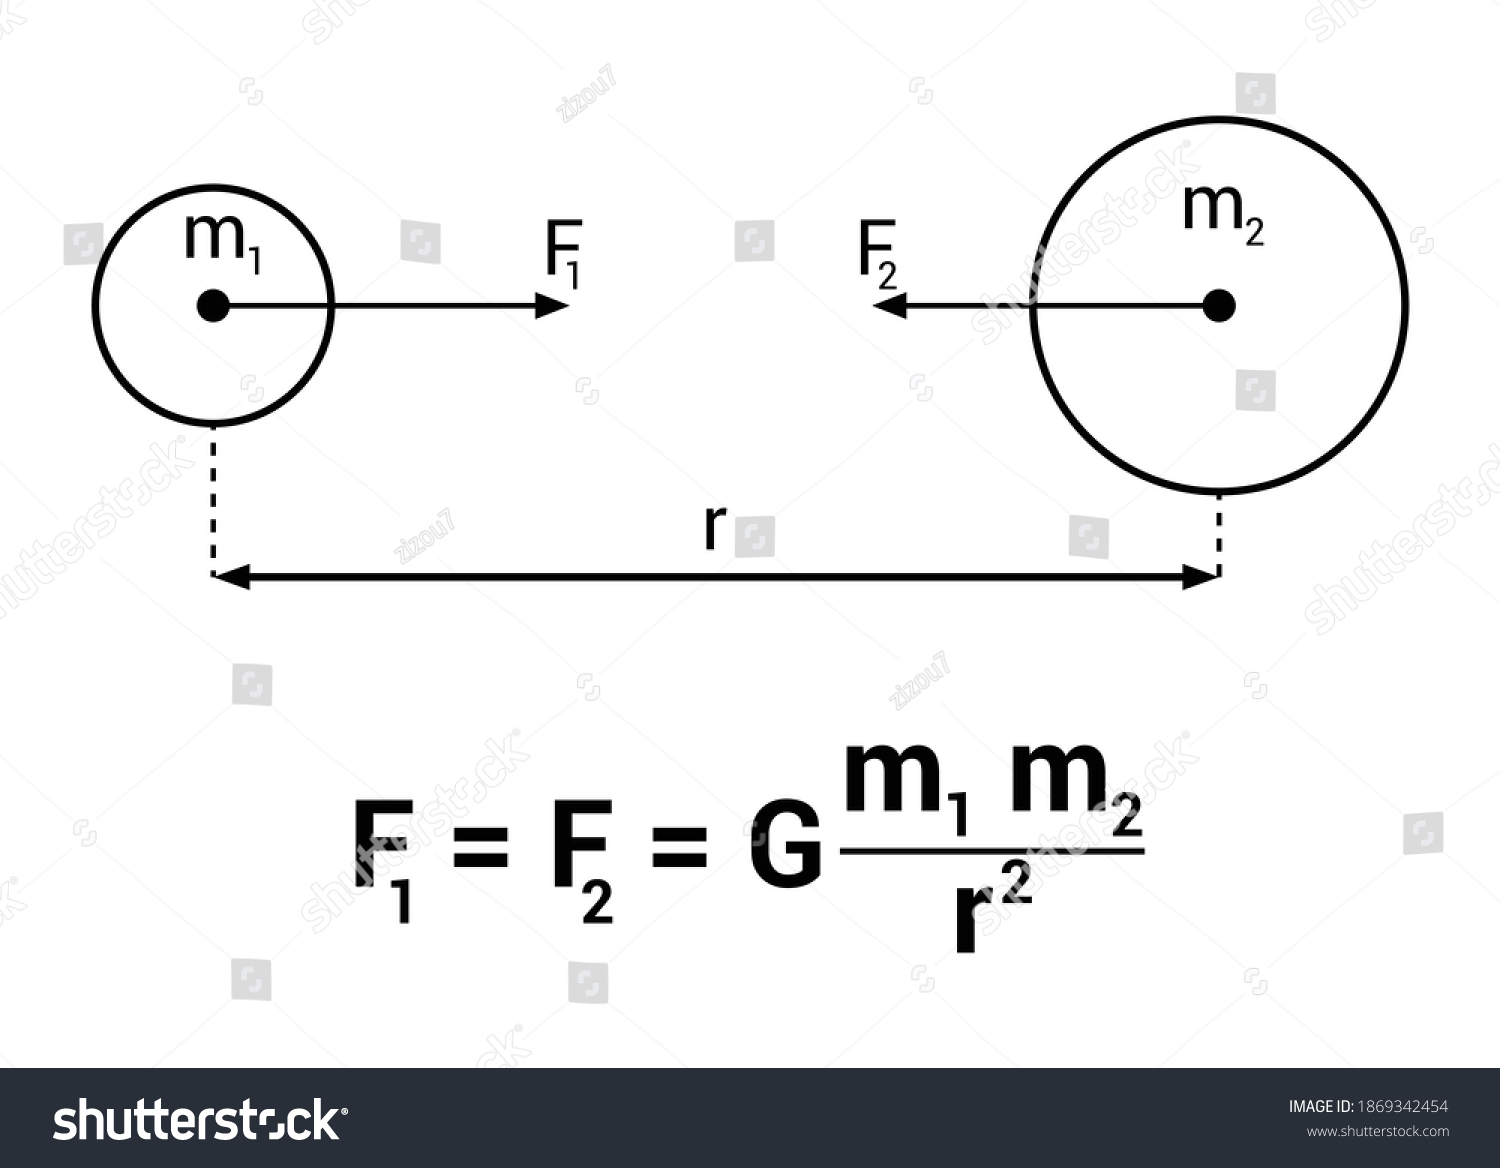 Universal Law Gravitation Newtons Law Stock Vector Royalty Free 1869342454 Shutterstock 7575